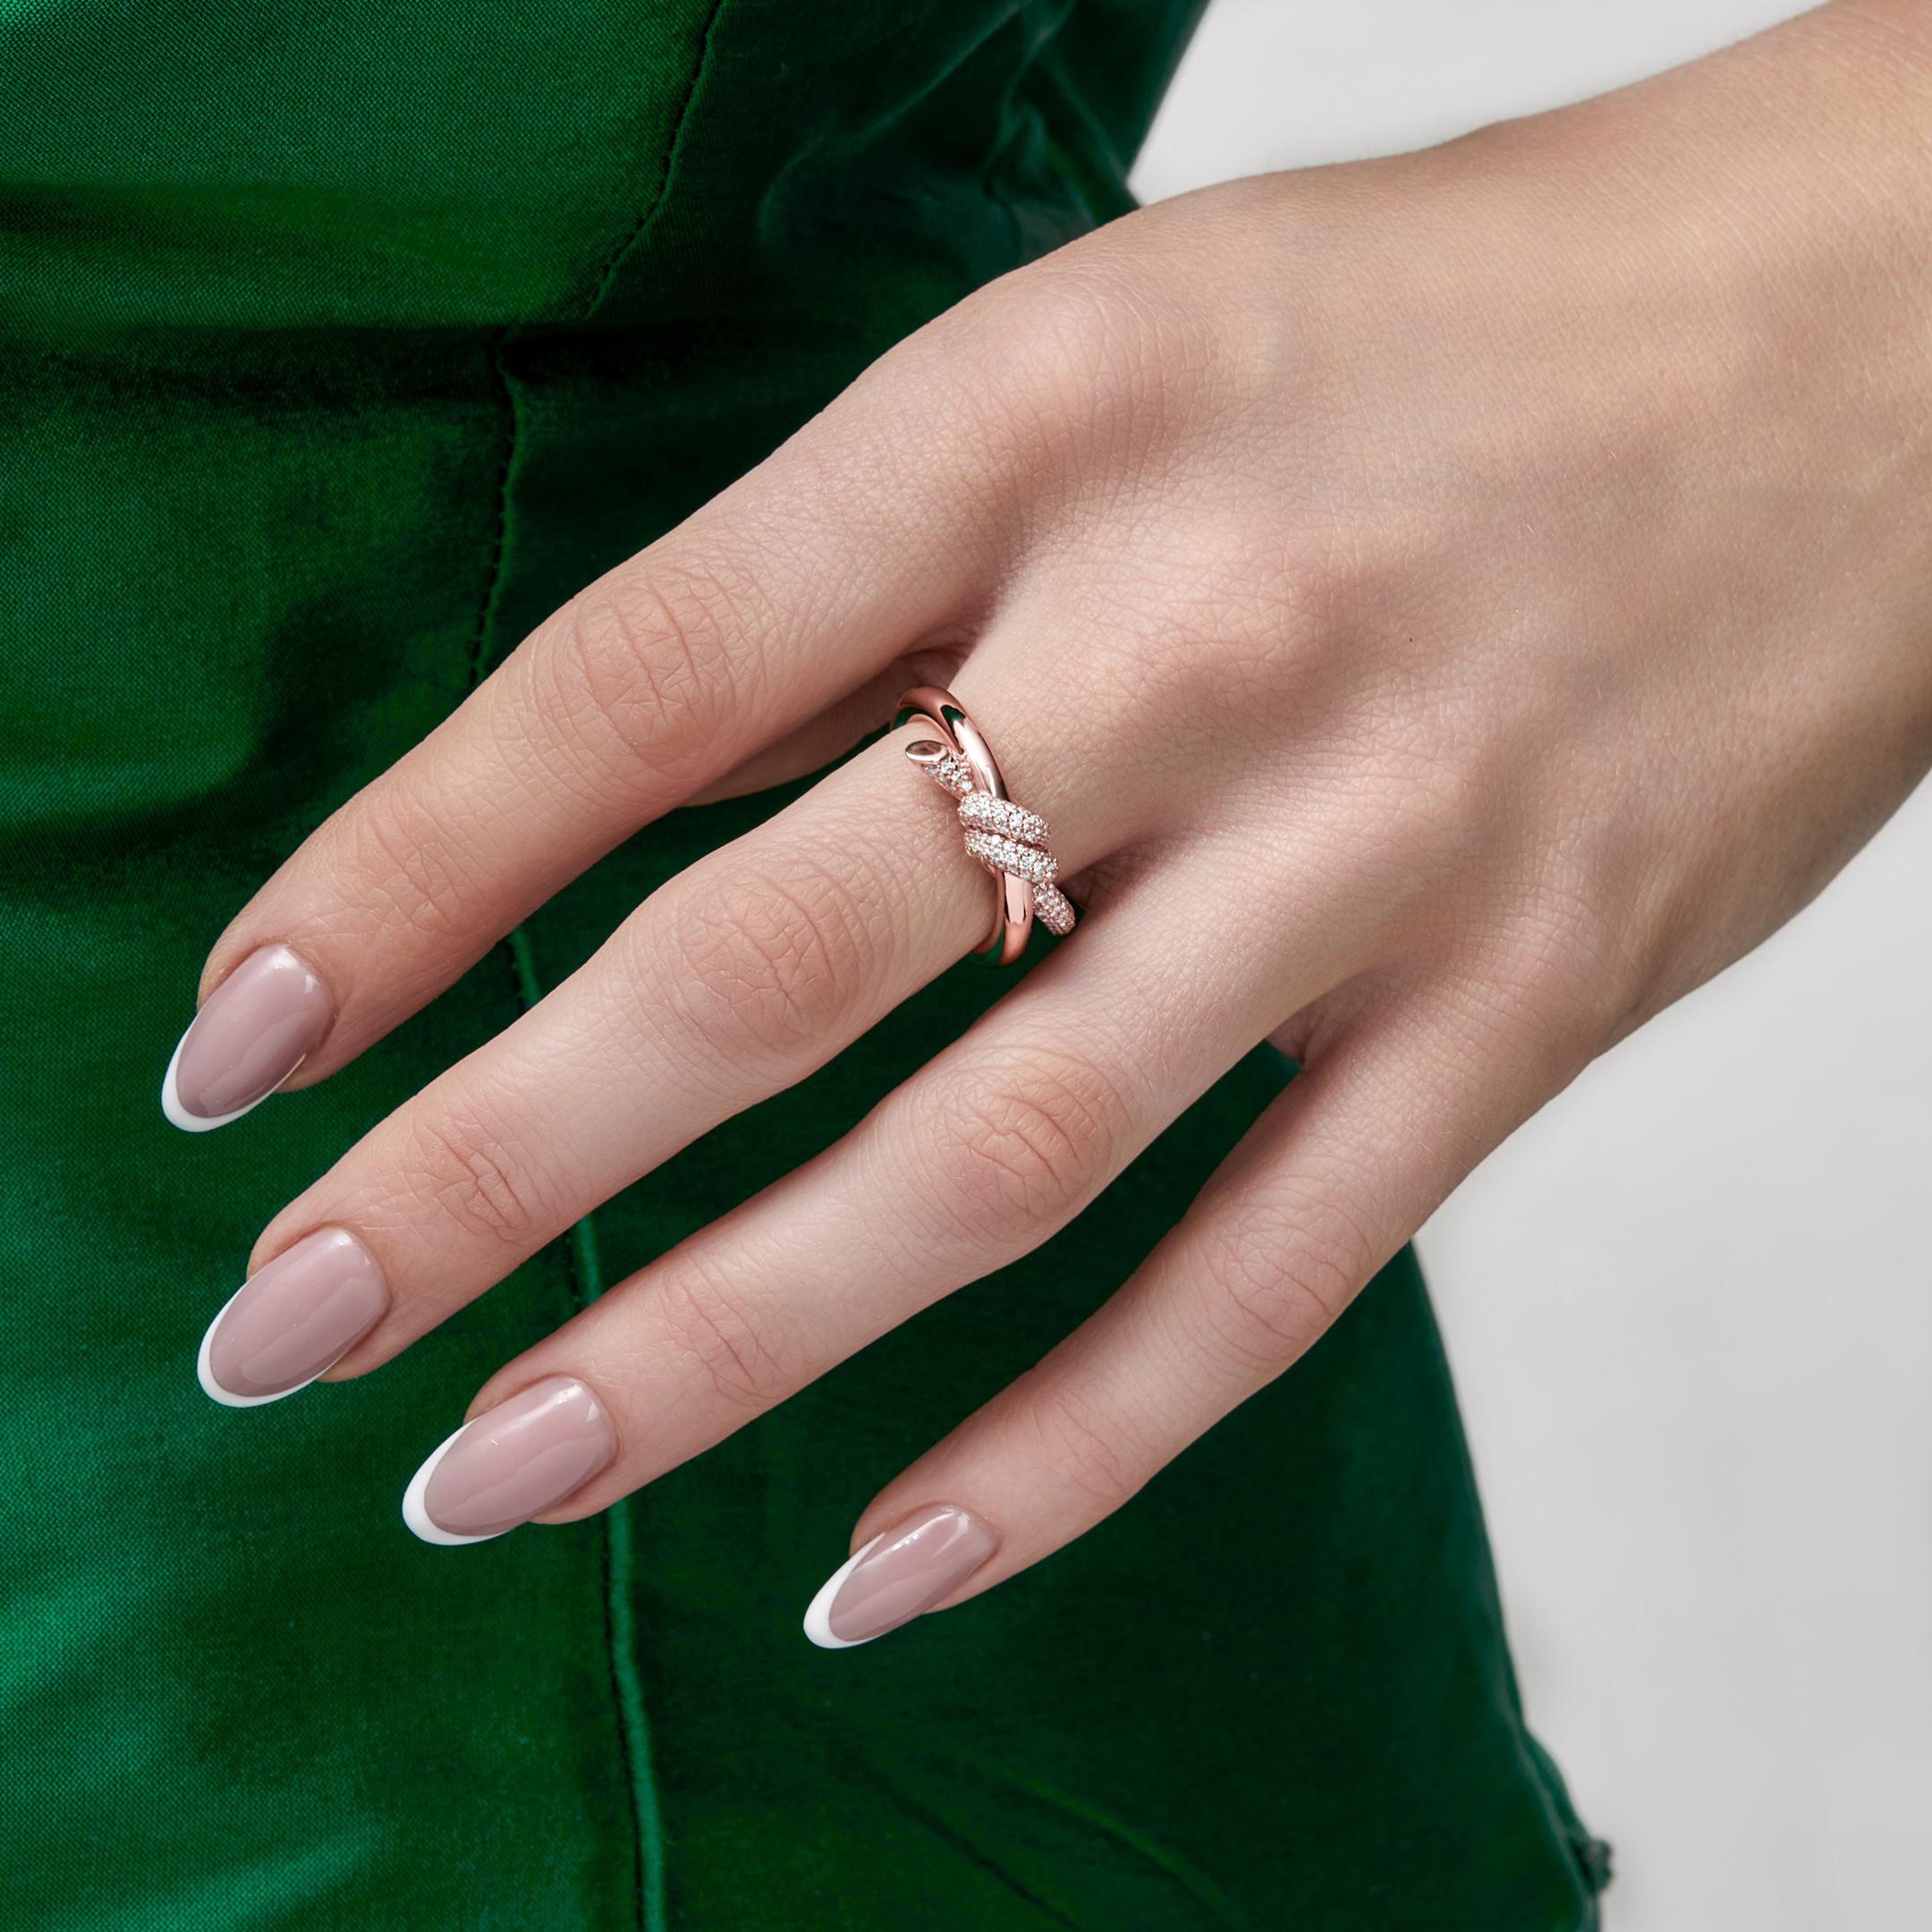 Elevate your style with the Tiffany & Co. Knot Double Row Ring in Rose Gold with Diamonds. Its entwined design symbolizes the strength of human connections. Each round brilliant diamond, meticulously selected to meet Tiffany's standards, is expertly